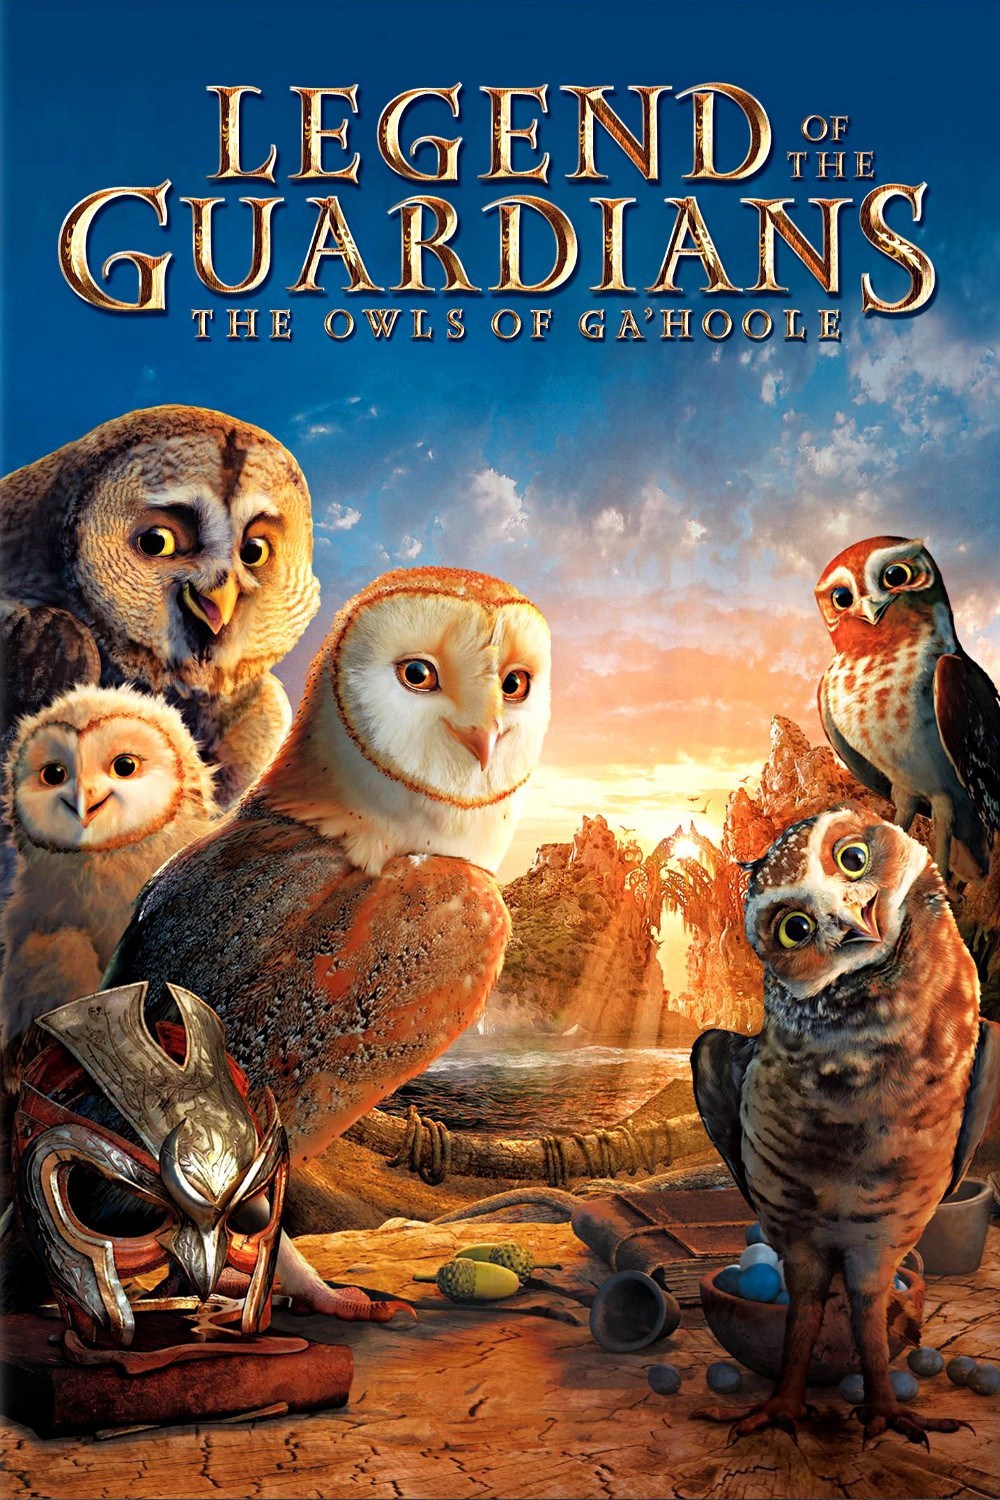 LEGEND OF THE GUARDIANS THE OWLS GAHOOL…